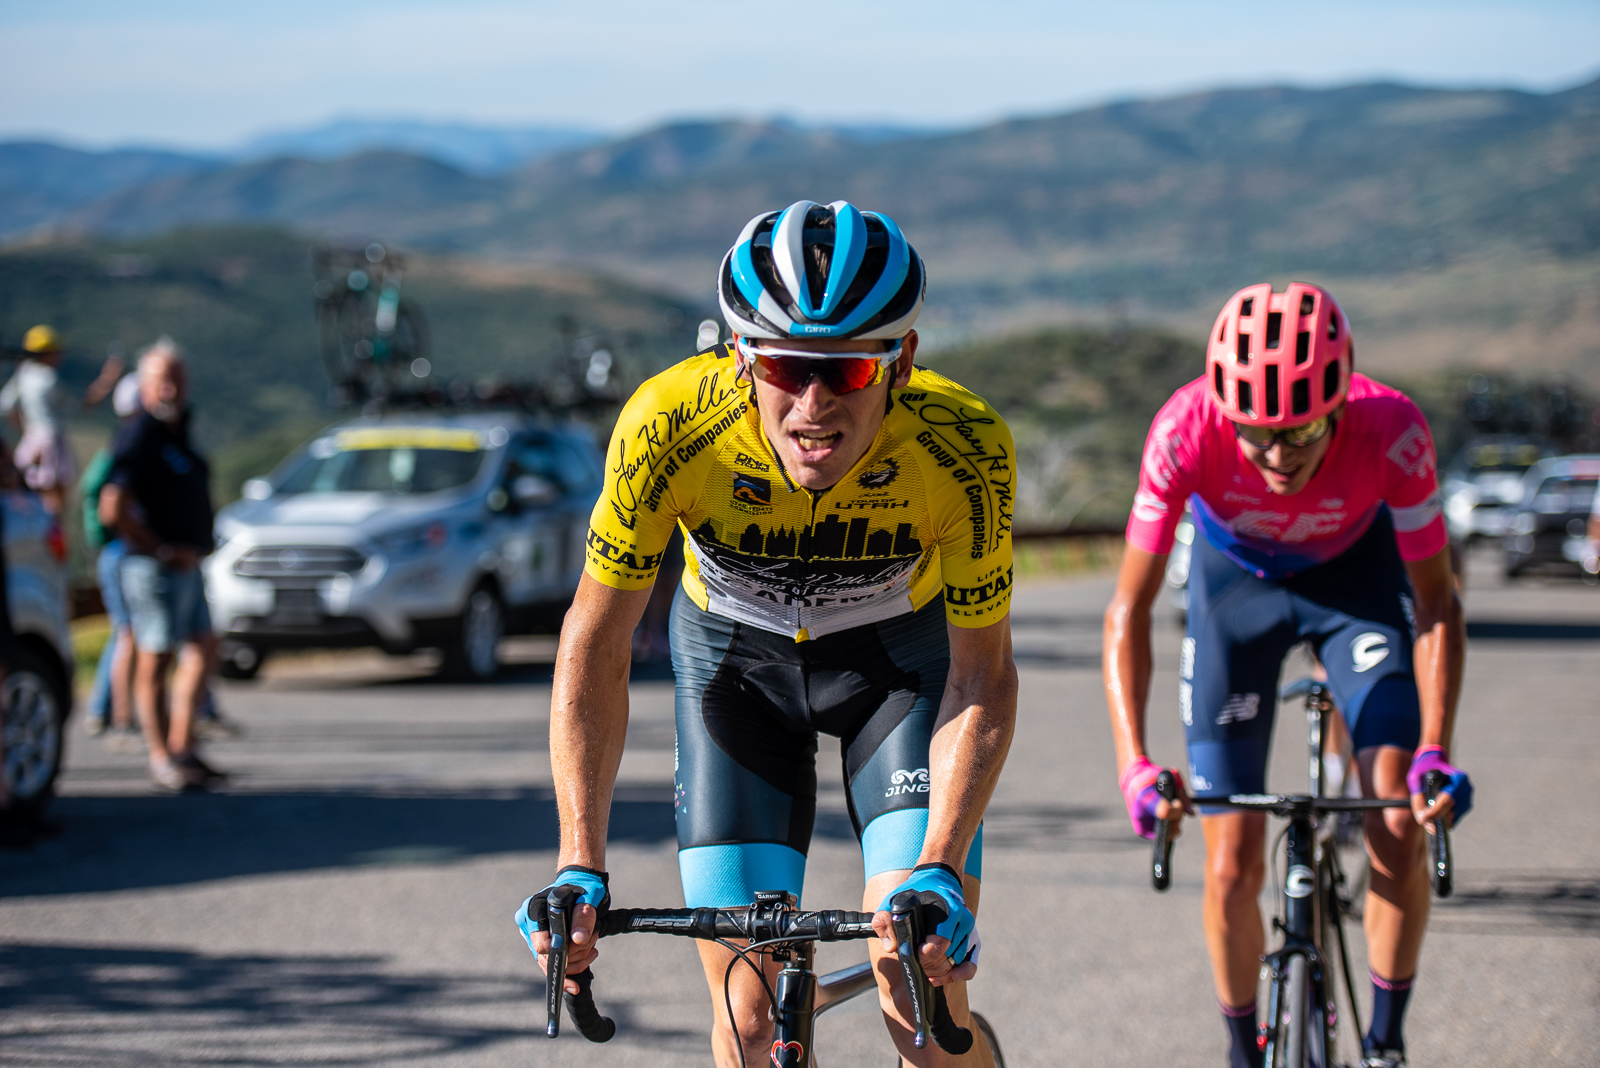 Ben Hermans (Israel Cycling Academy) leads Joe Dombrowski (EF Education First) over the top. Stage 5, 2019 Tour of Utah. Photo by Steven L. Sheffield